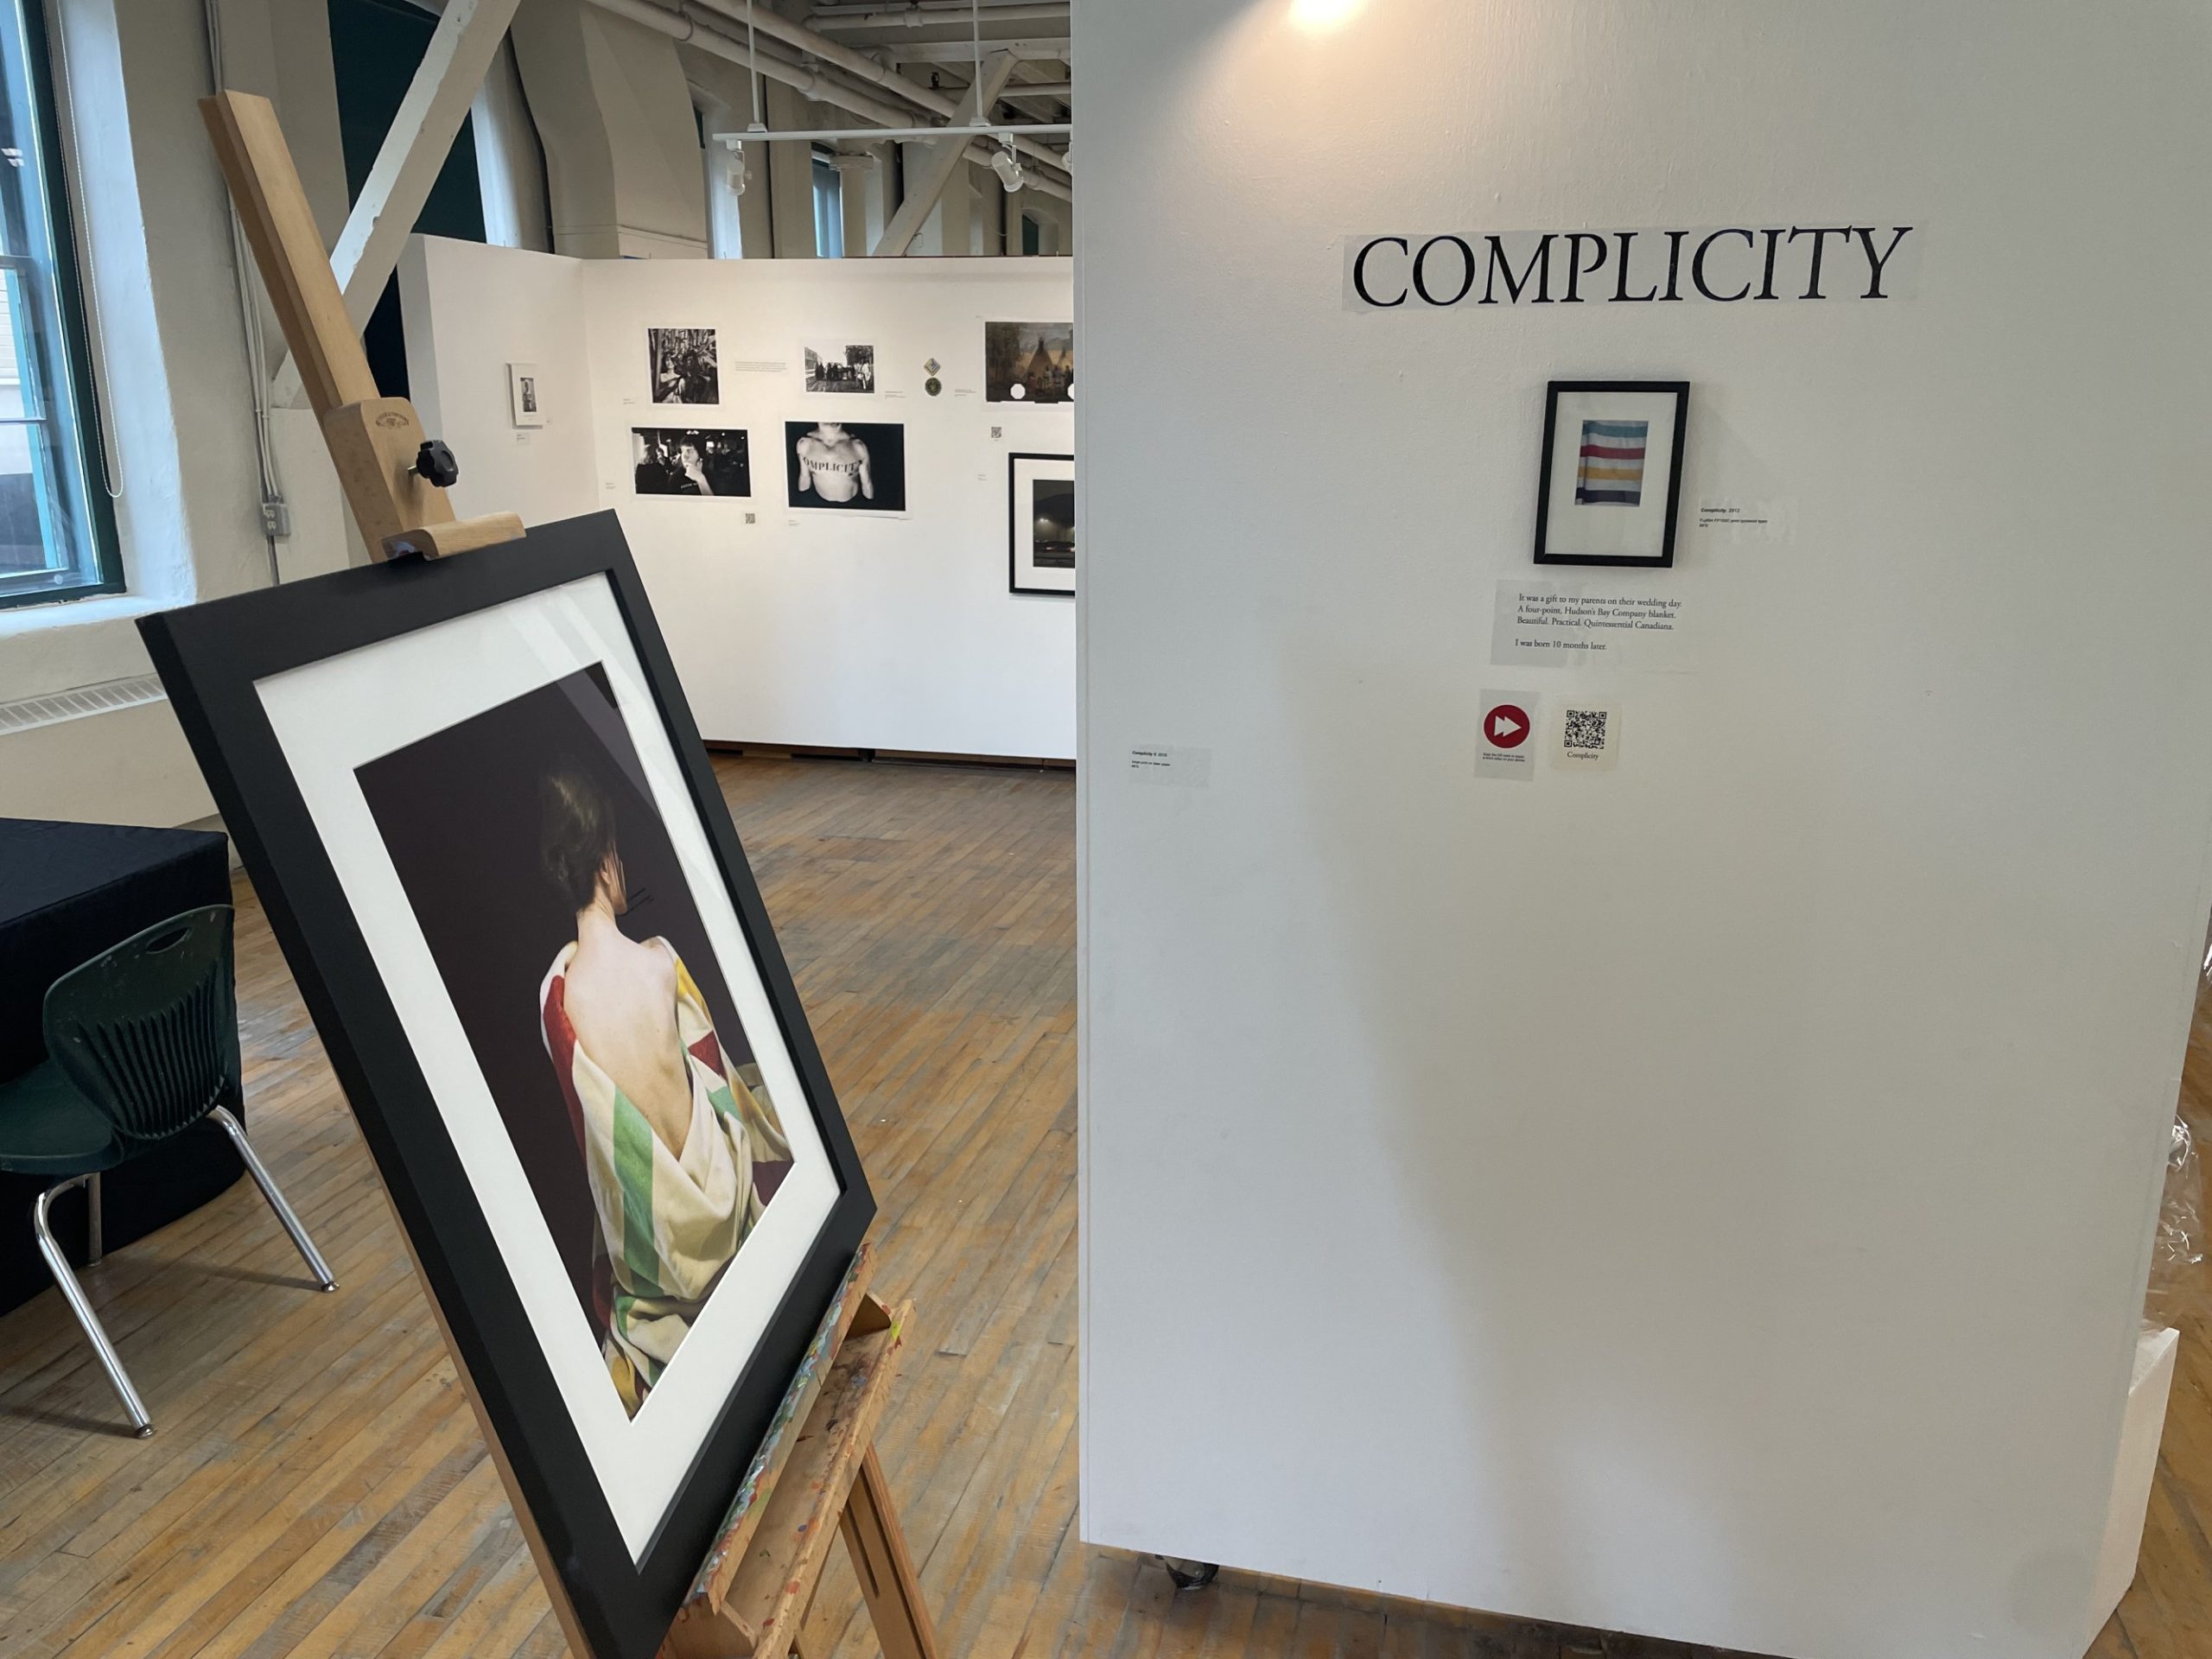 COMPLICITY art exhibit at the button factory